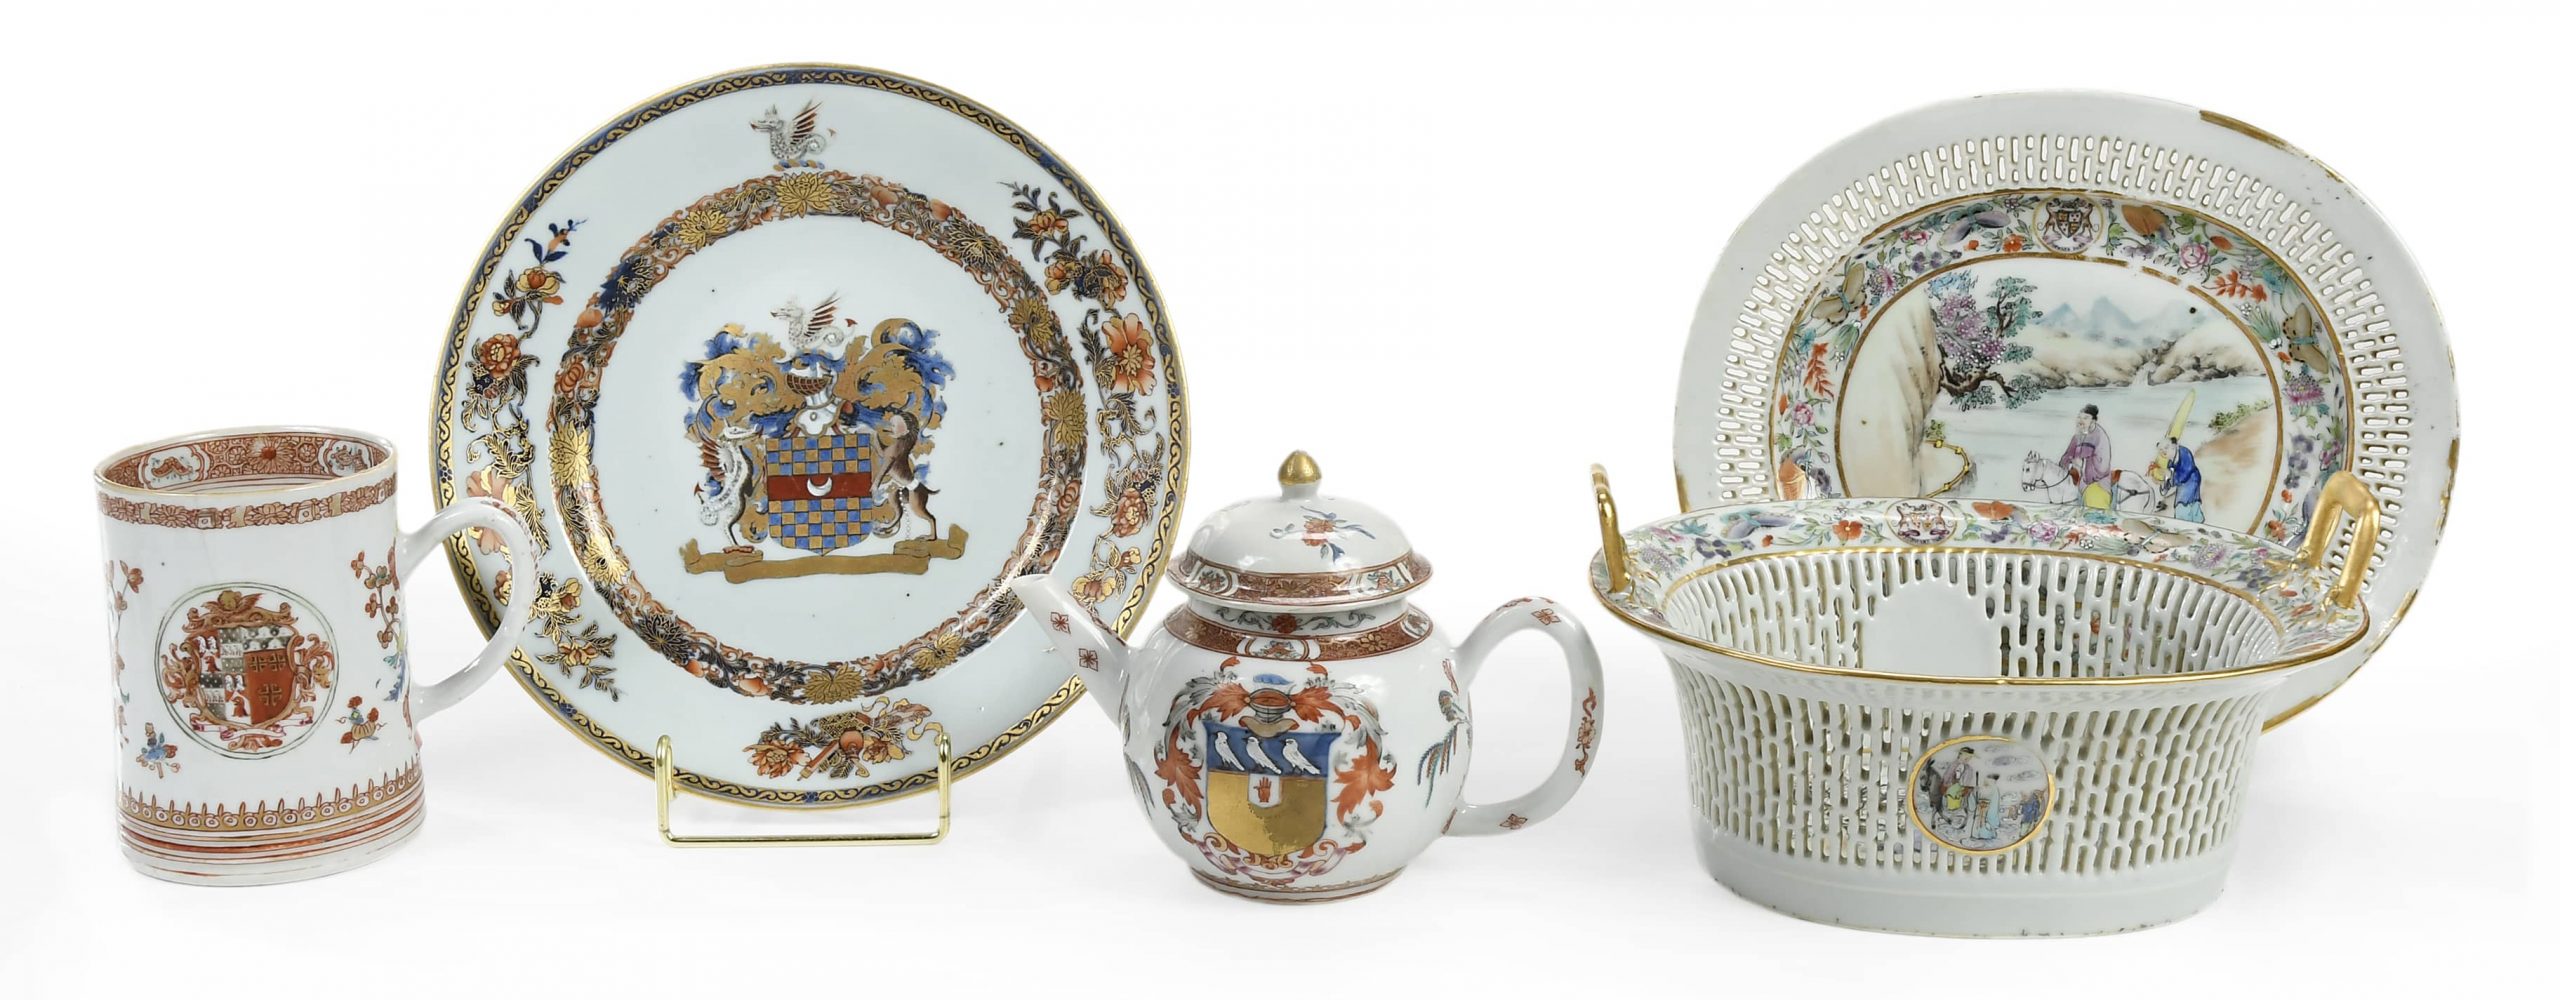 Christopher M. Weld: A Collector’s Taste | February 2-4, 2023